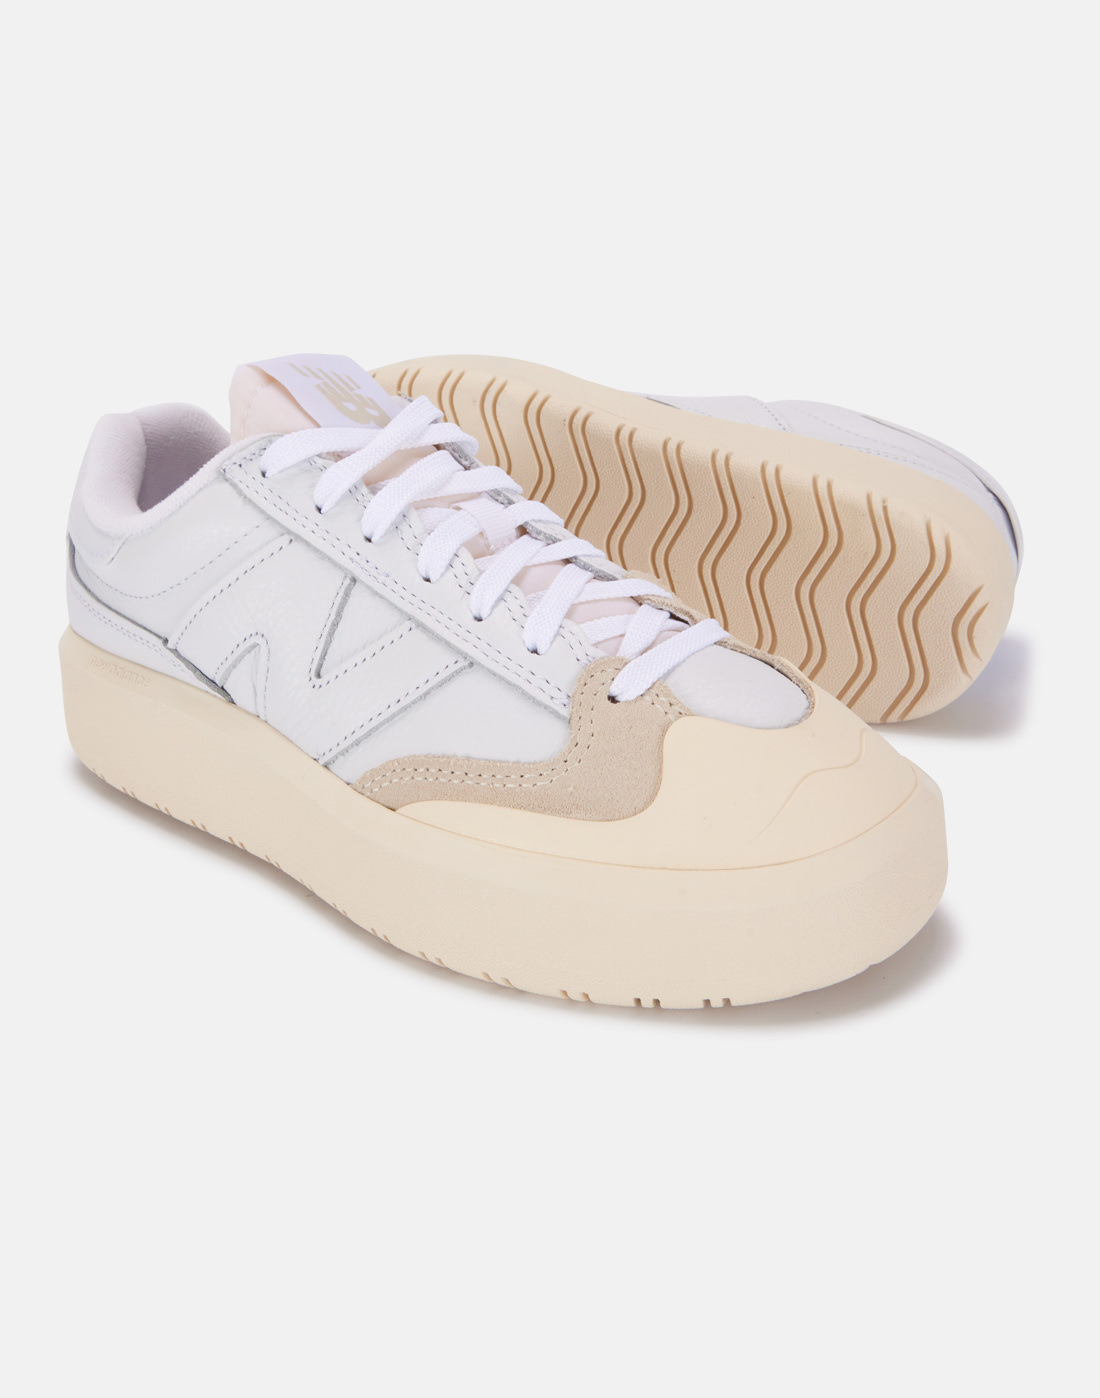 New Balance Womens CT302 Trainers - White | Life Style Sports IE